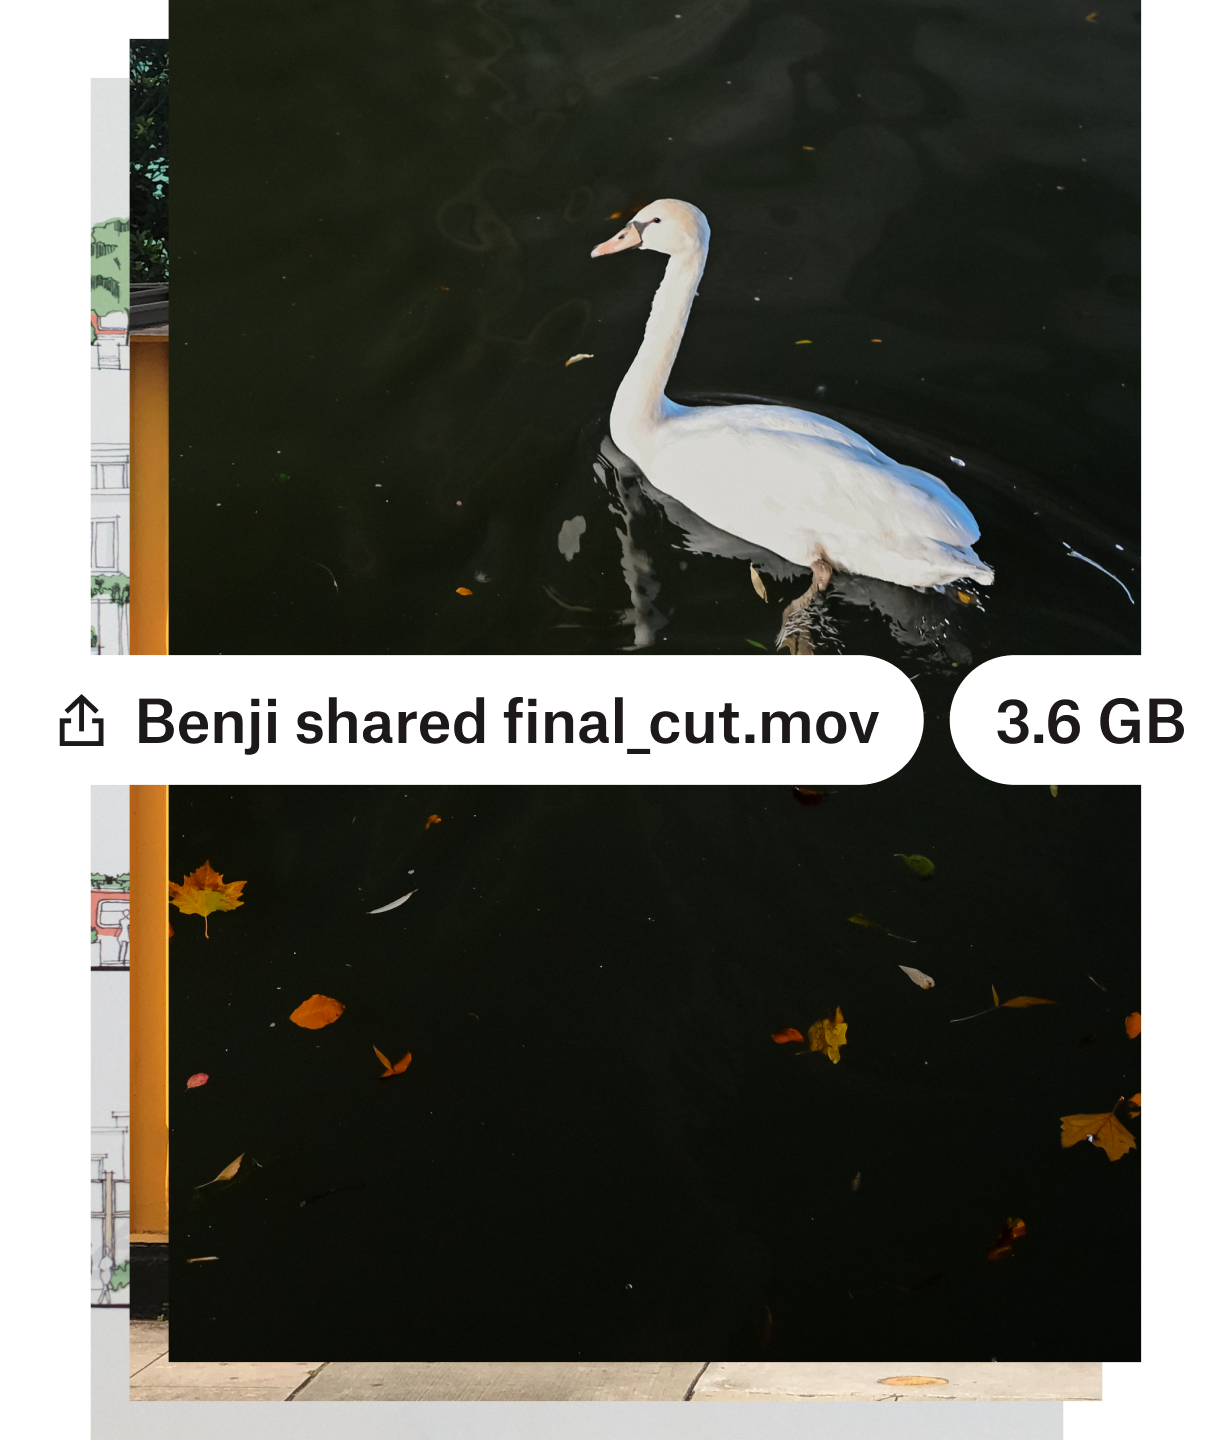 A user sharing a large video file of a bird in a pond